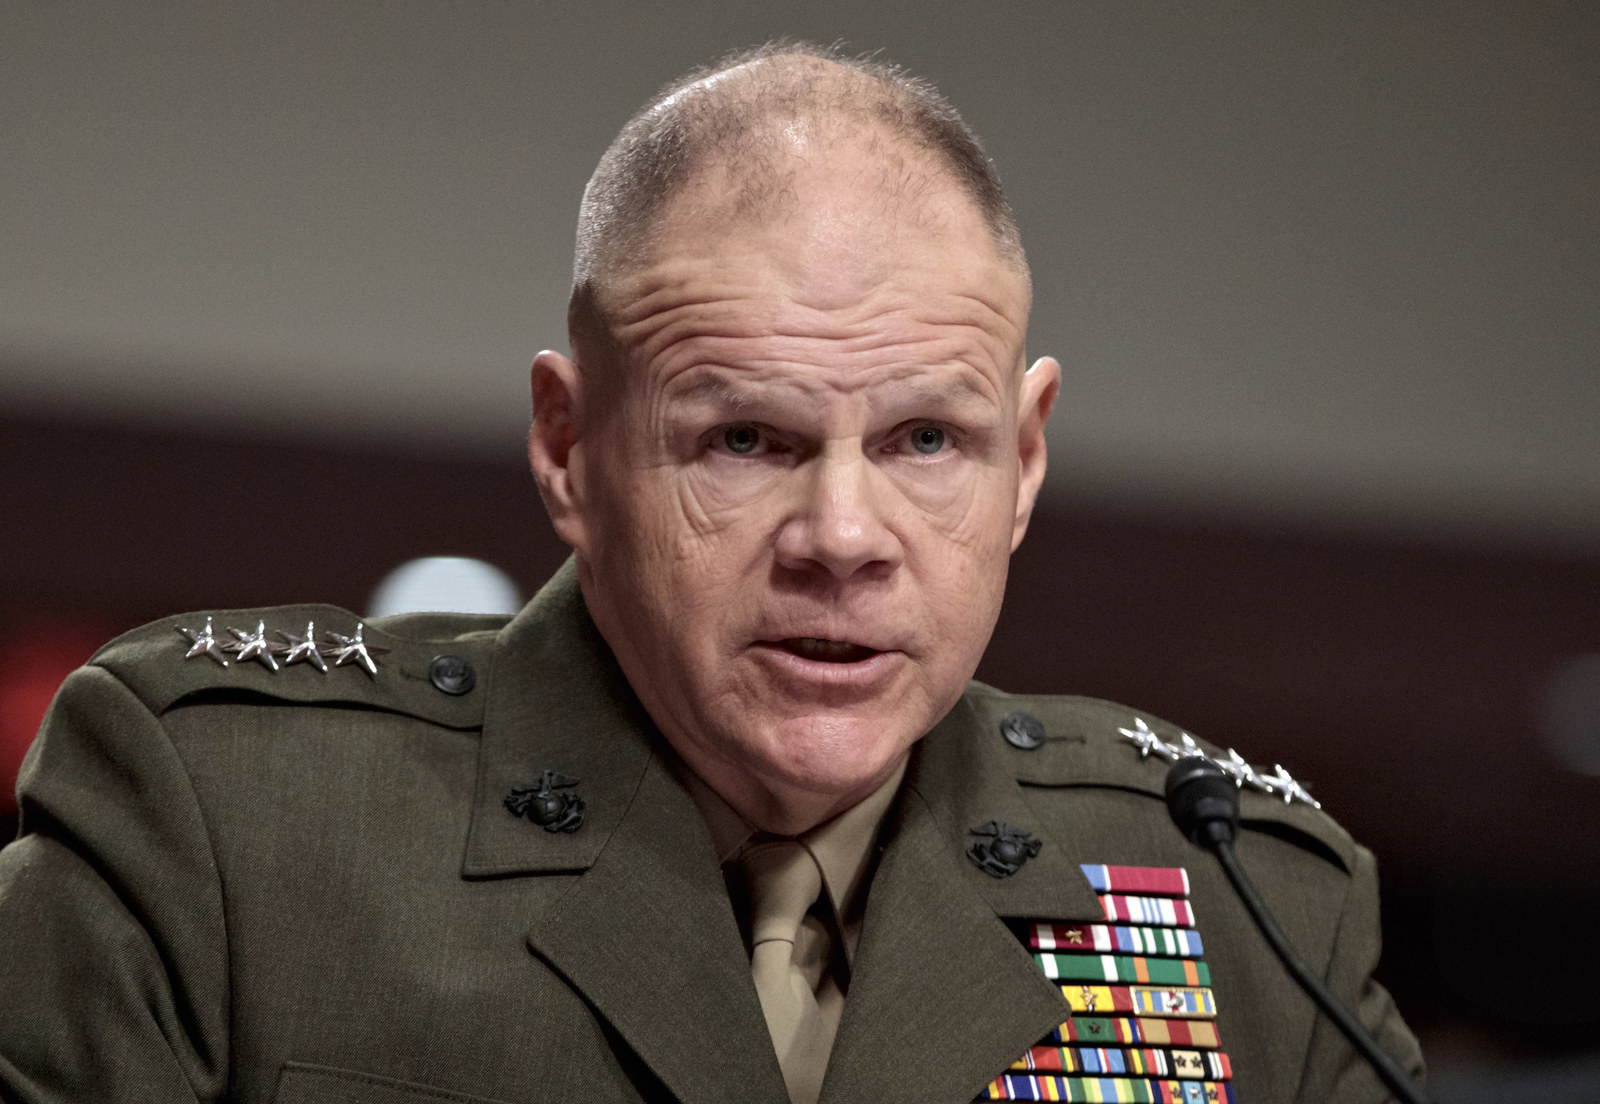 Marines to issue social media guidelines after nude photo 